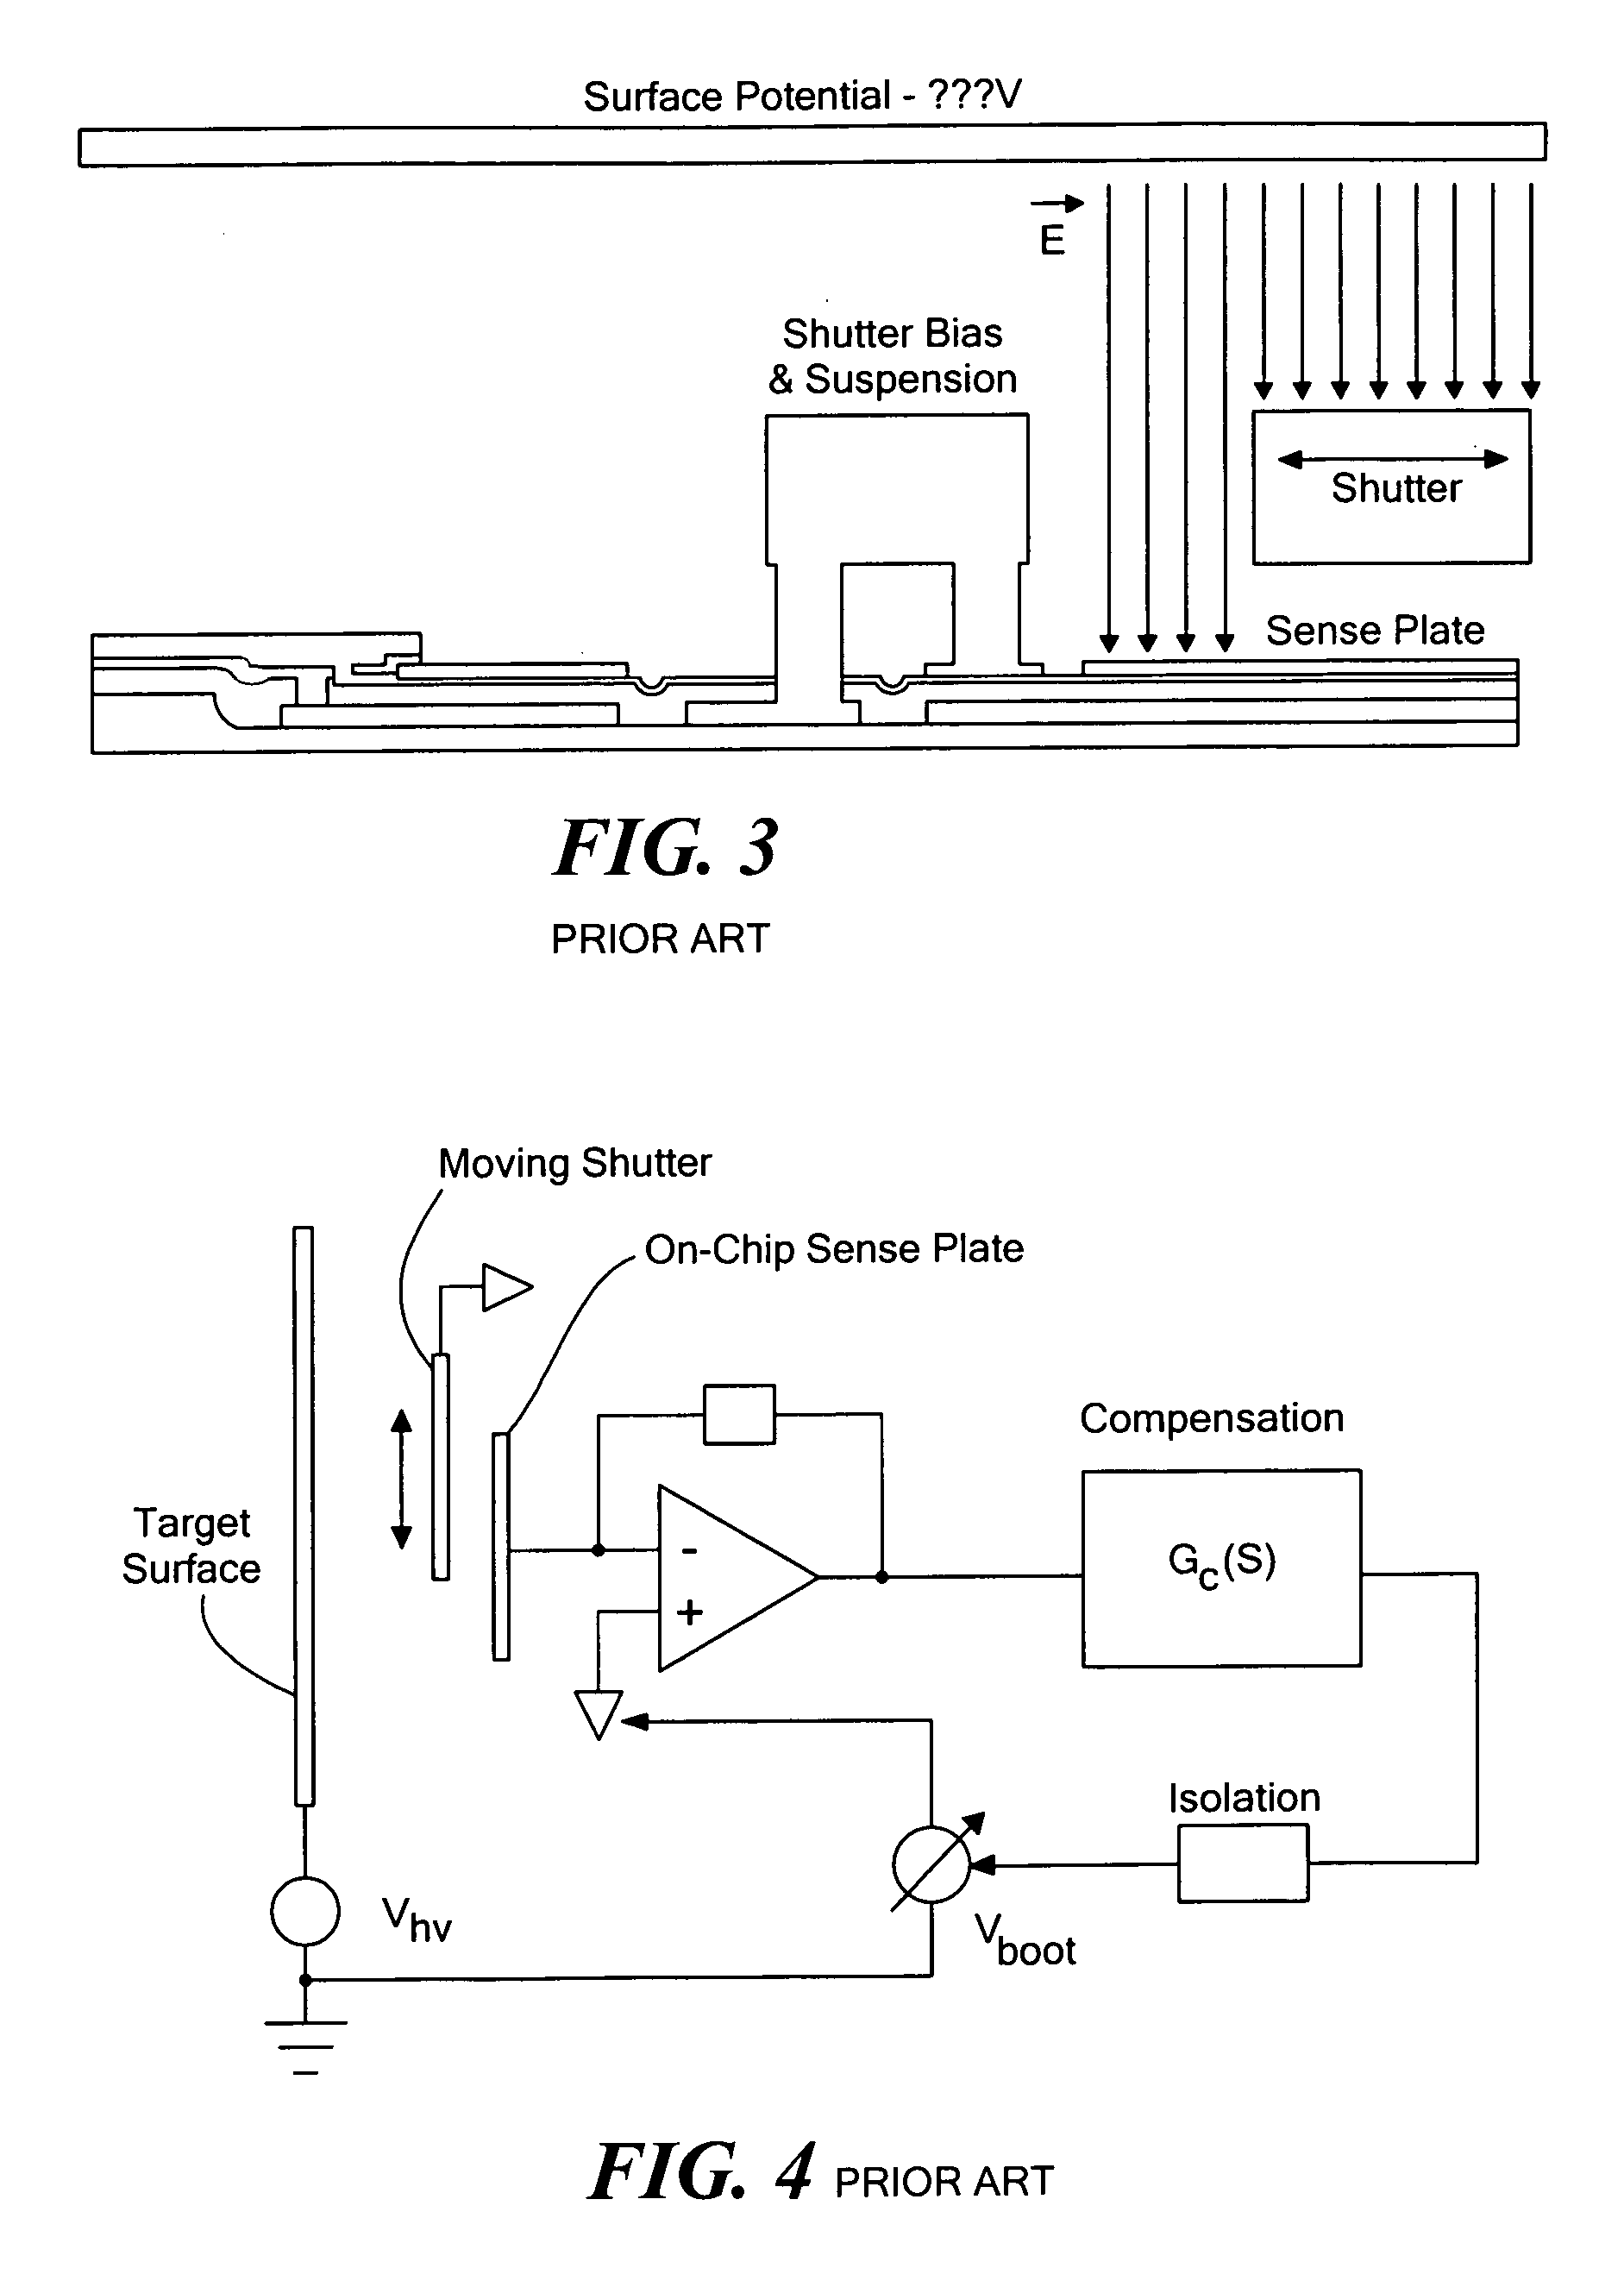 Non-contact high-voltage electrometer architecture with low-voltage feedback